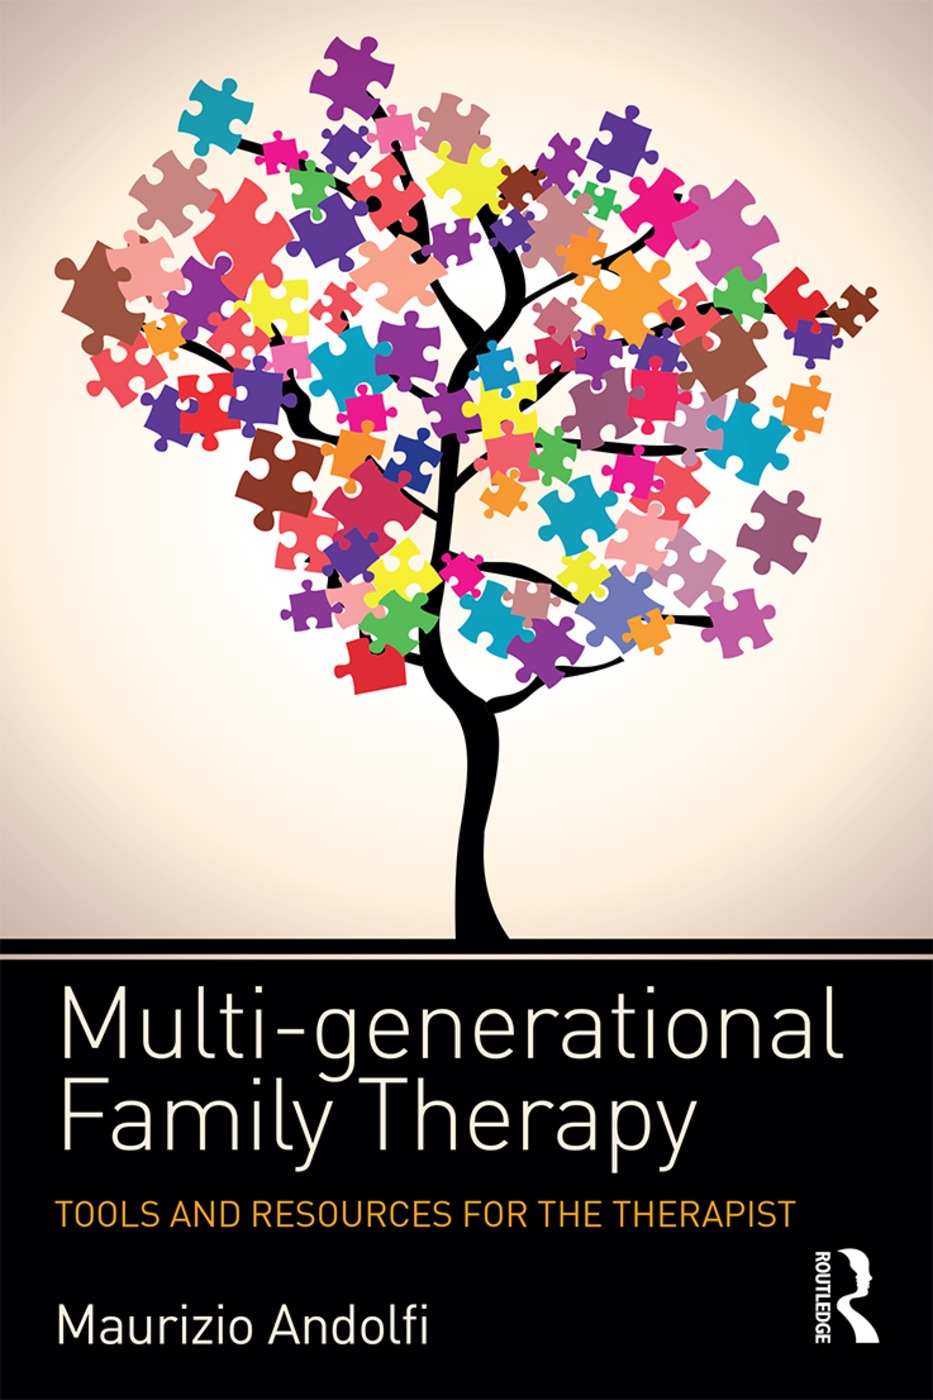 Multi-Generational Family Therapy: Tools and Resources for the Therapist